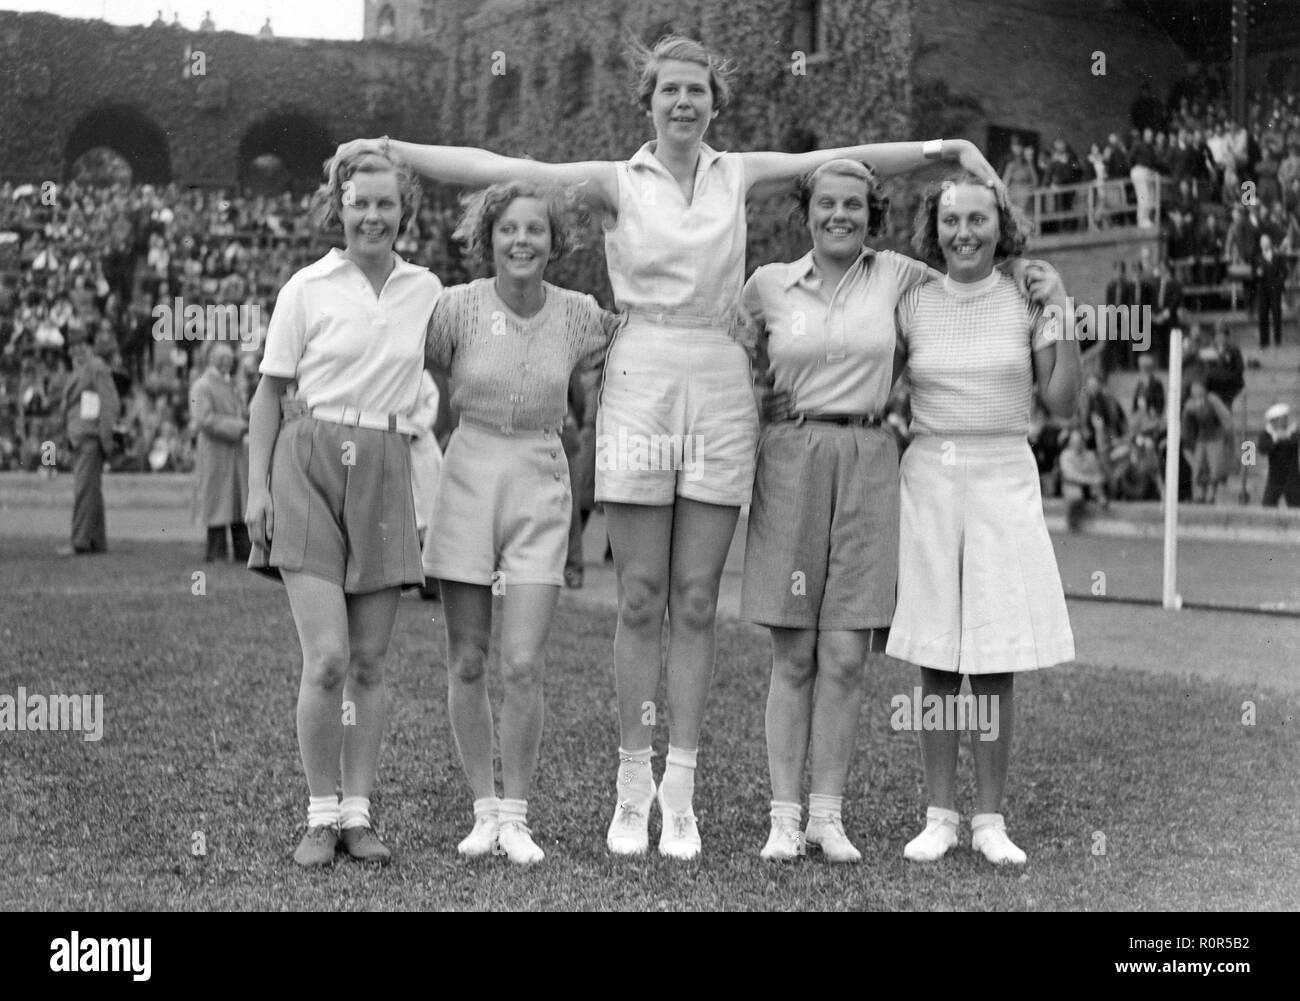 1930s women in sports. A group of women on Stockholm stadium June 3 1934. The tall girl in the middle is Kerstin Isberg. Stock Photo